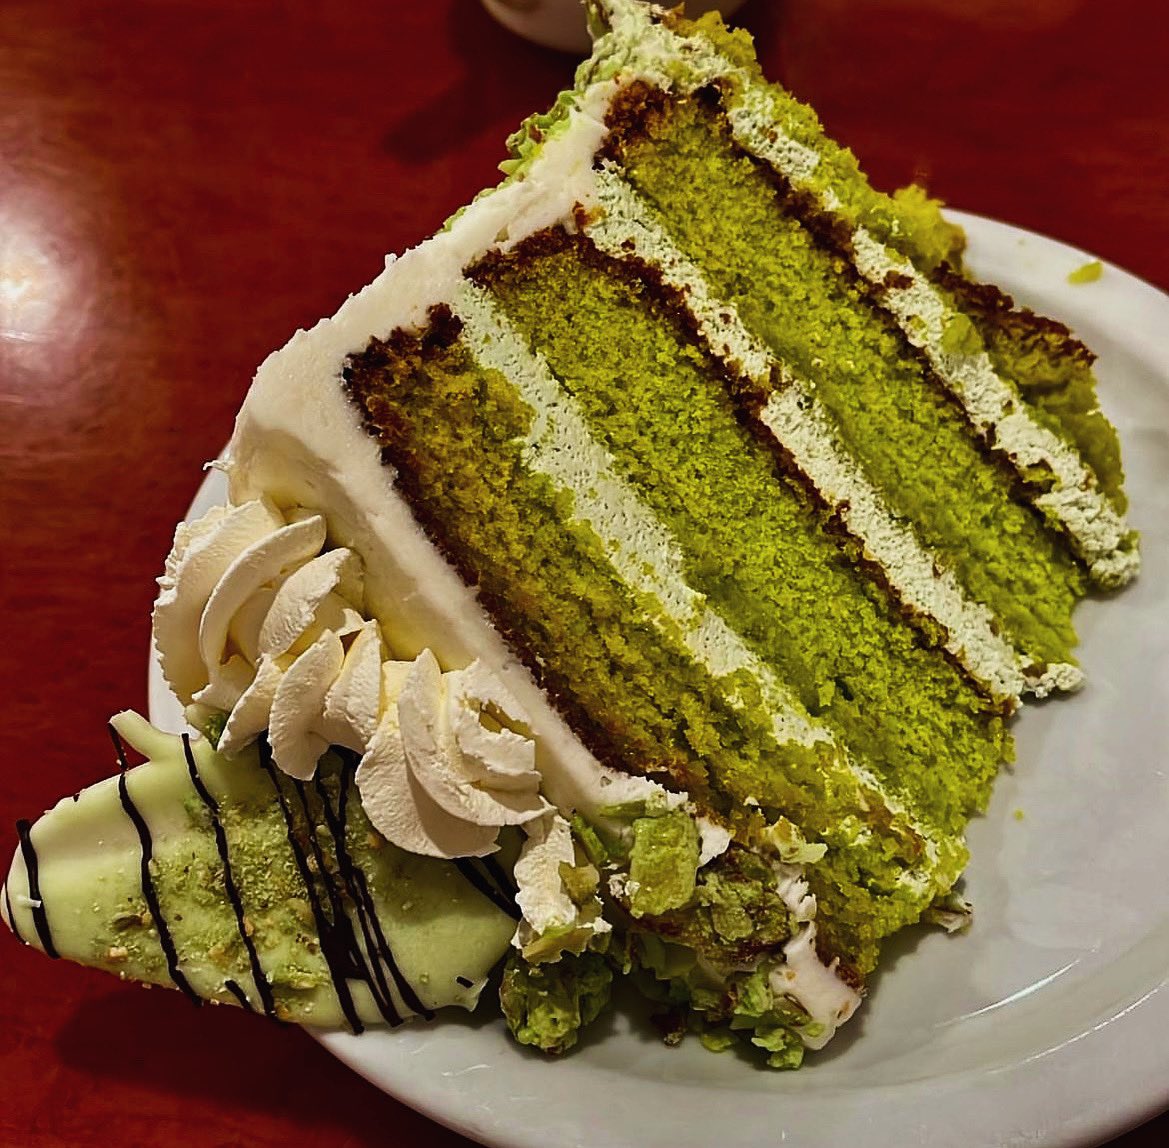 I just consumed this pistachio cake from Sherman’s Deli in Palm Springs. No regrets detected.